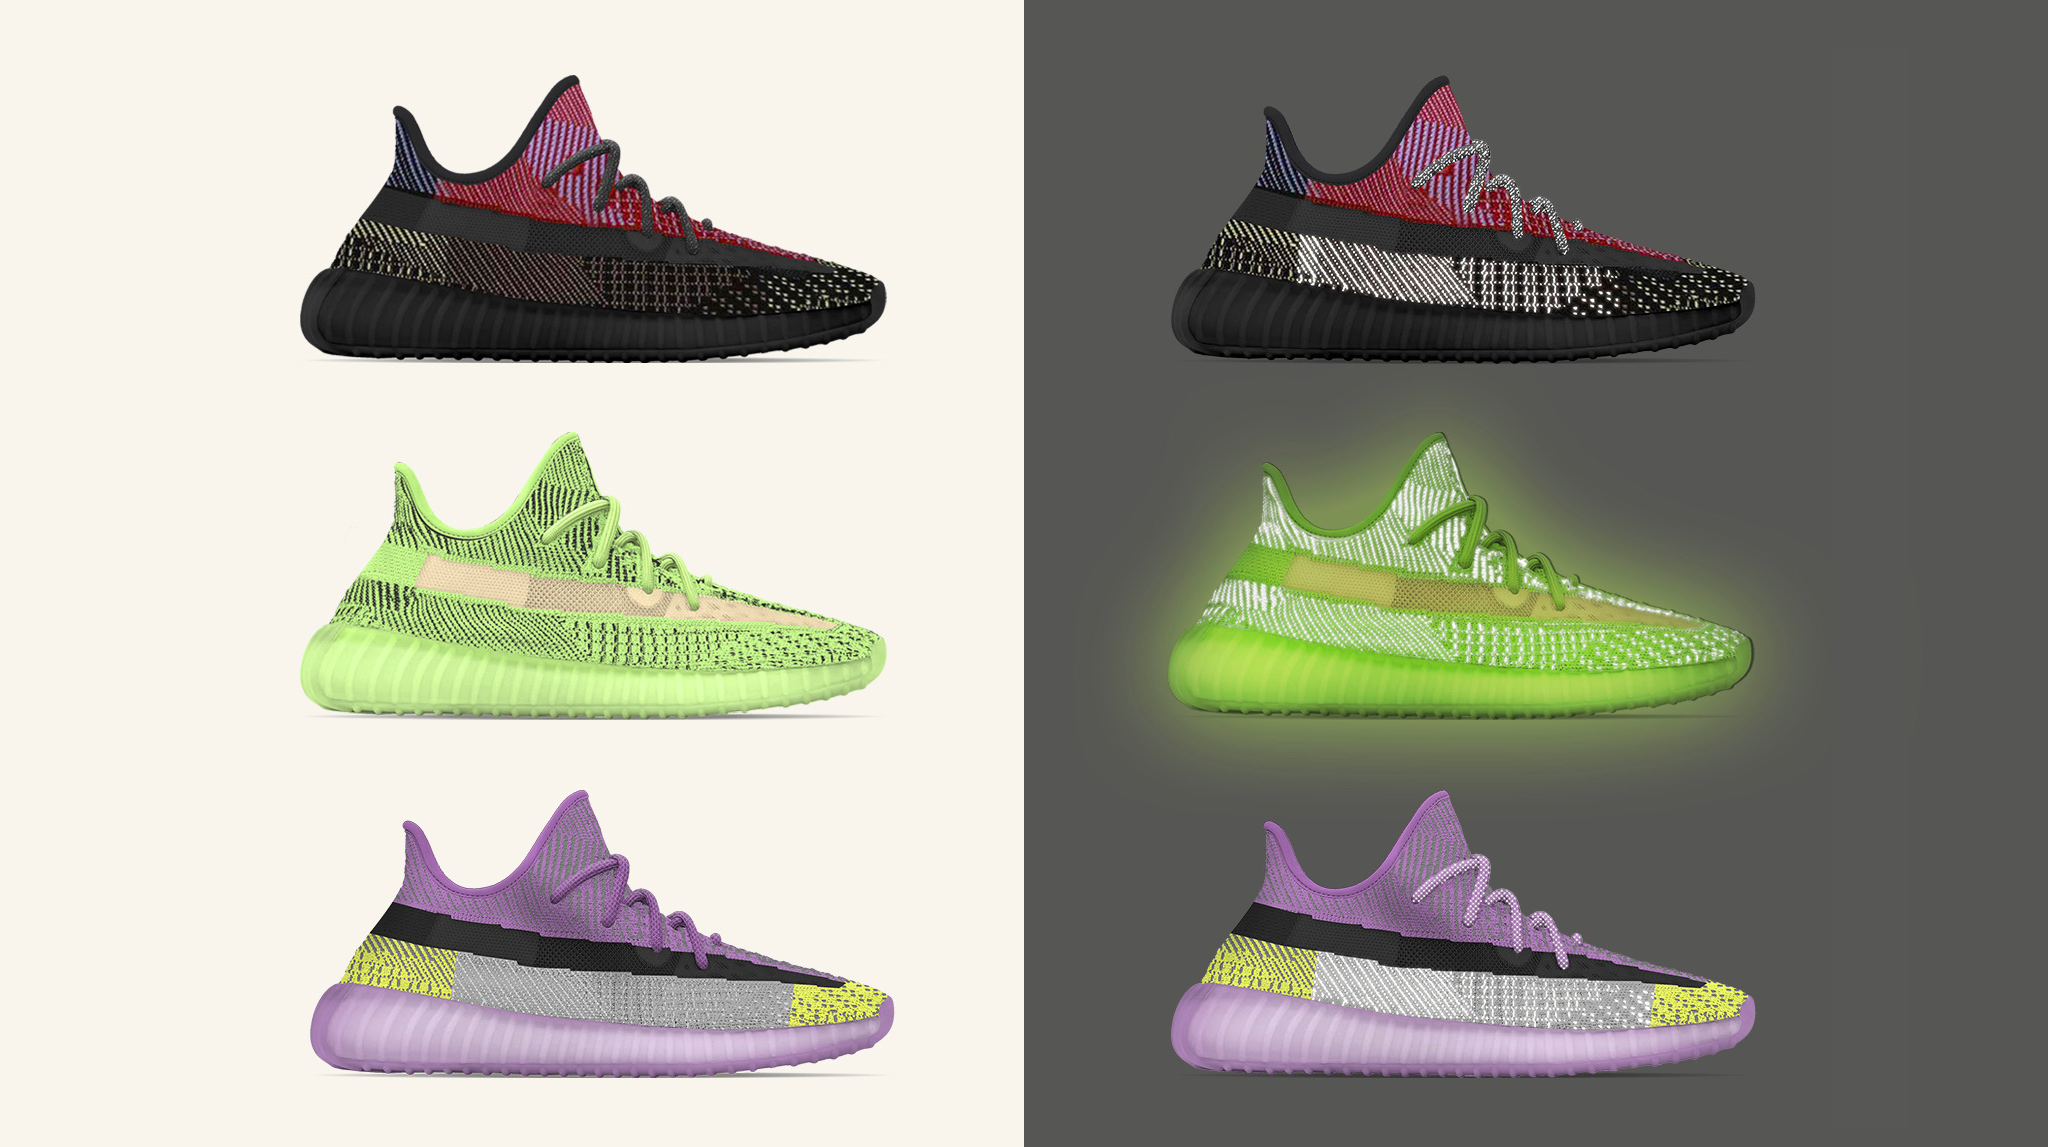 yeezy boost 350 upcoming releases